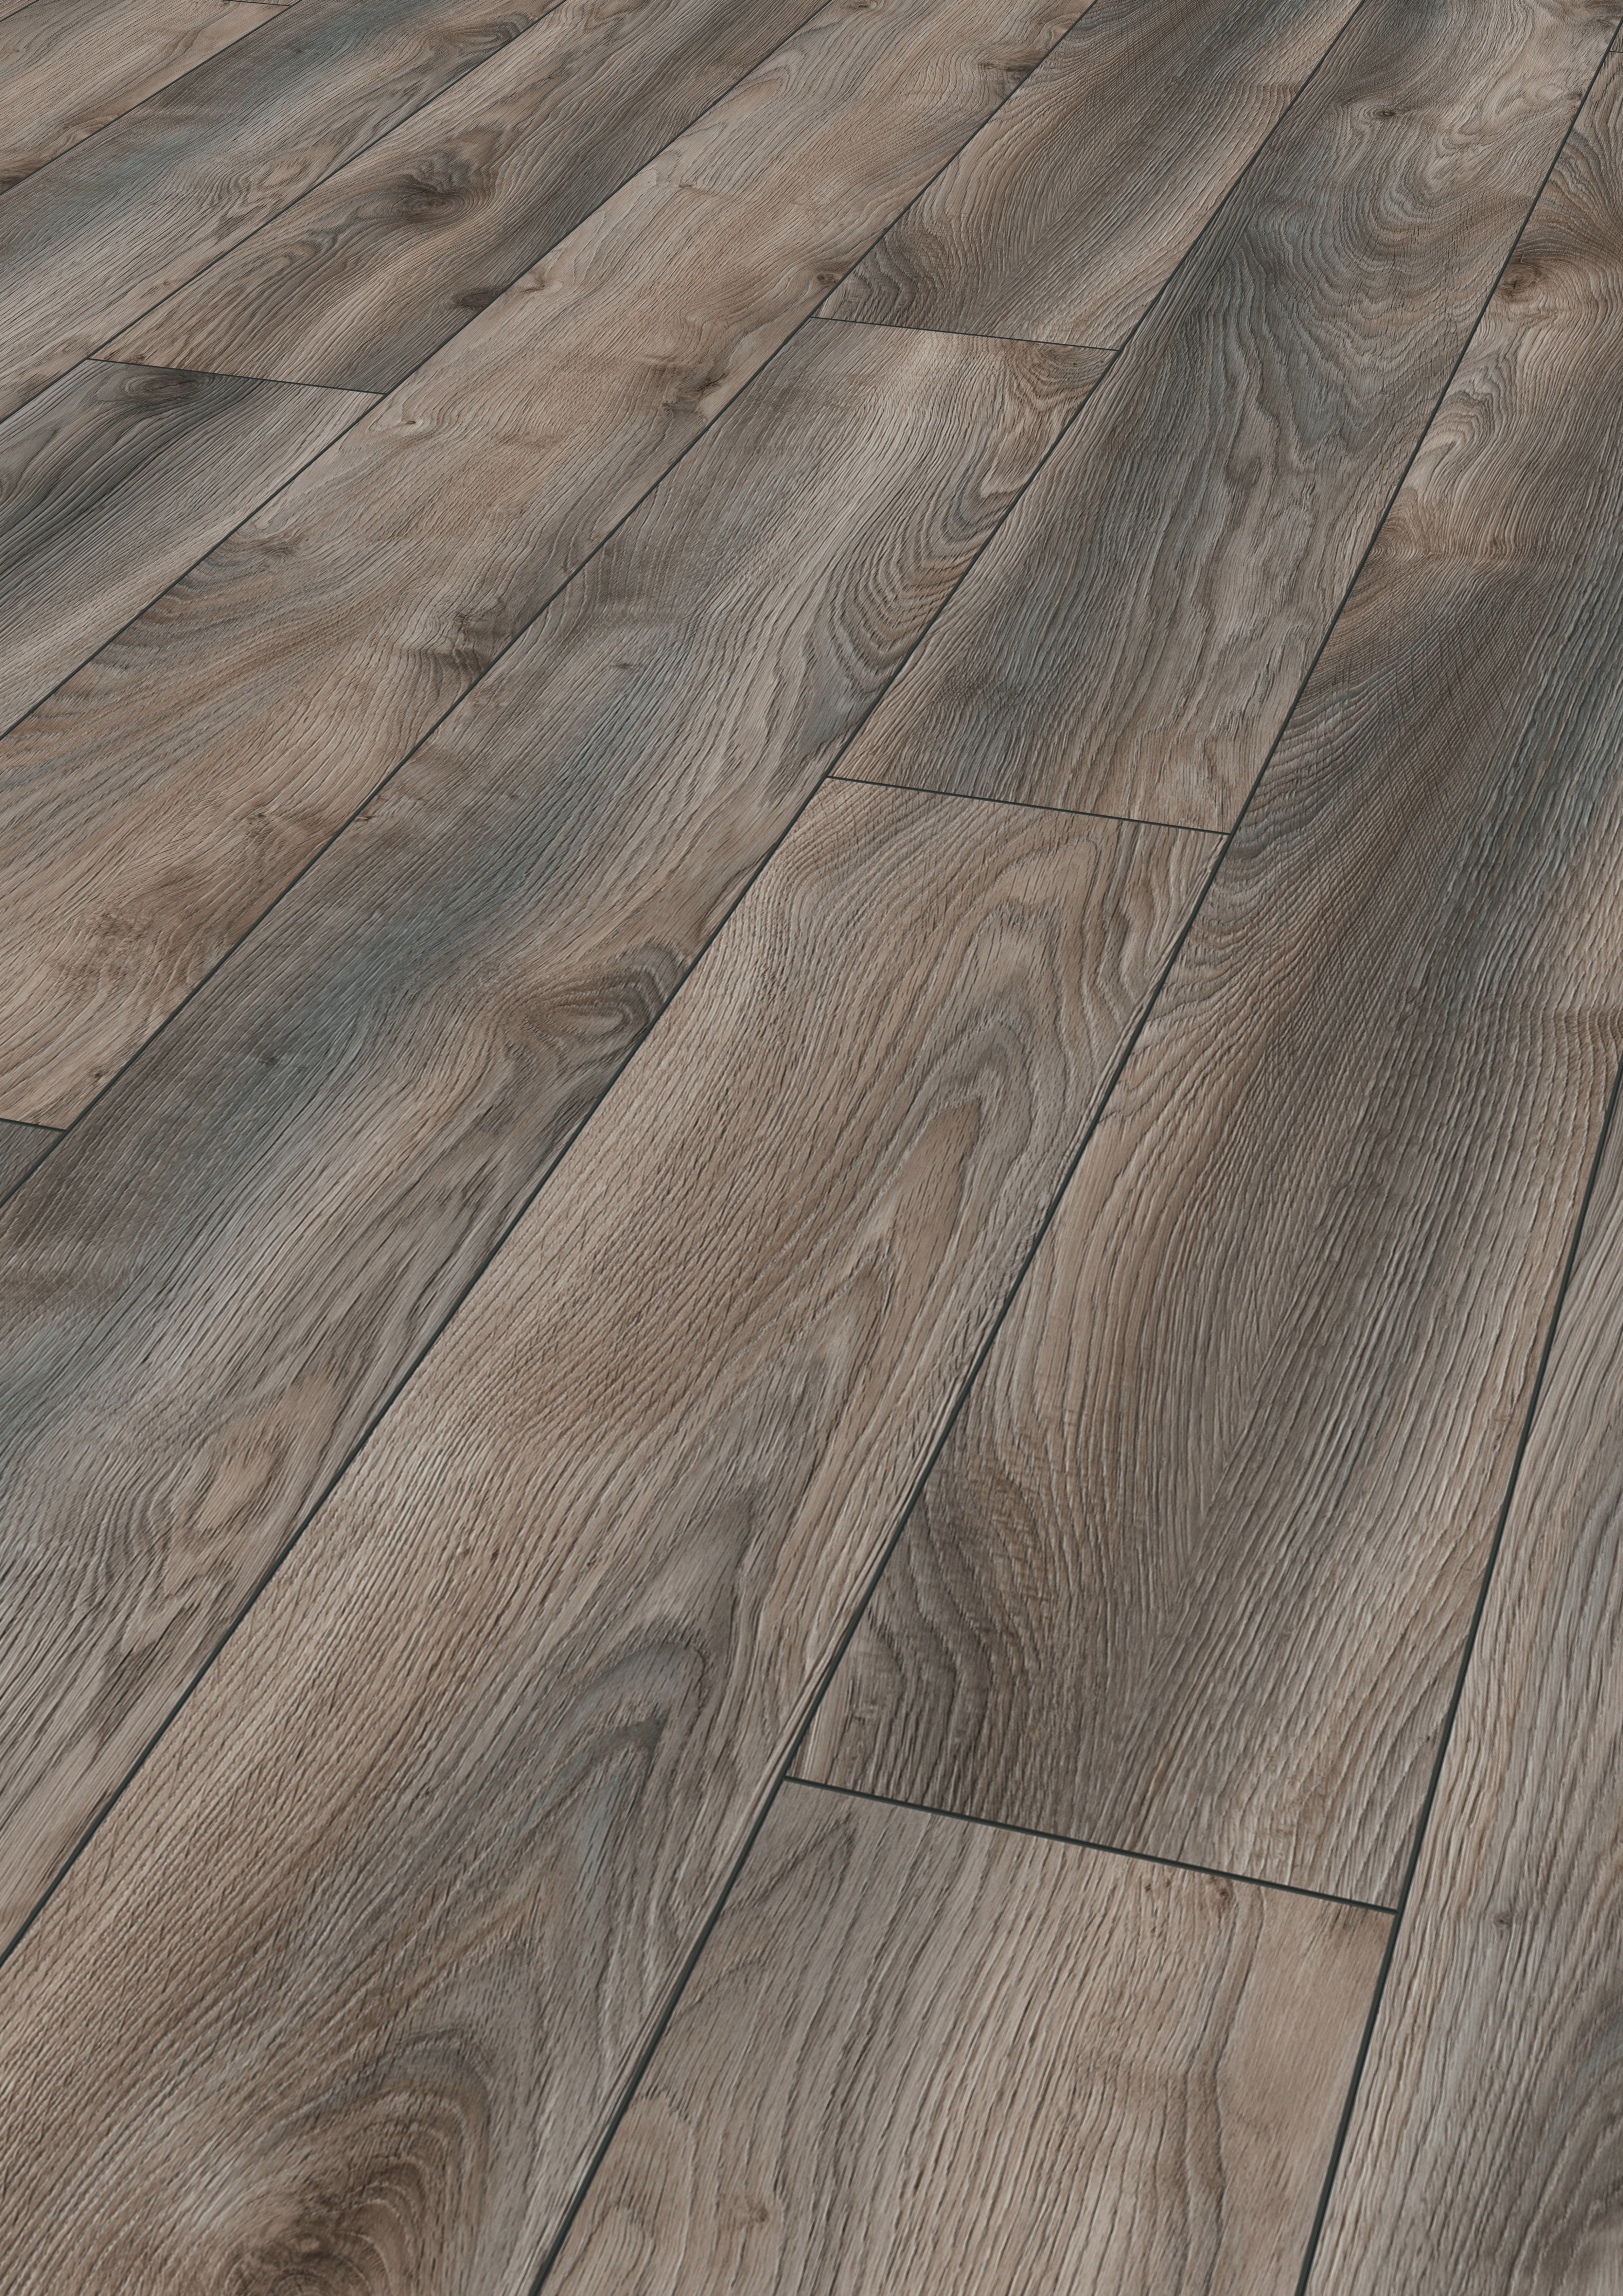 29 Amazing 2 1 4 Oak Hardwood Flooring 2024 free download 2 1 4 oak hardwood flooring of mammut laminate flooring in country house plank style kronotex intended for download picture amp